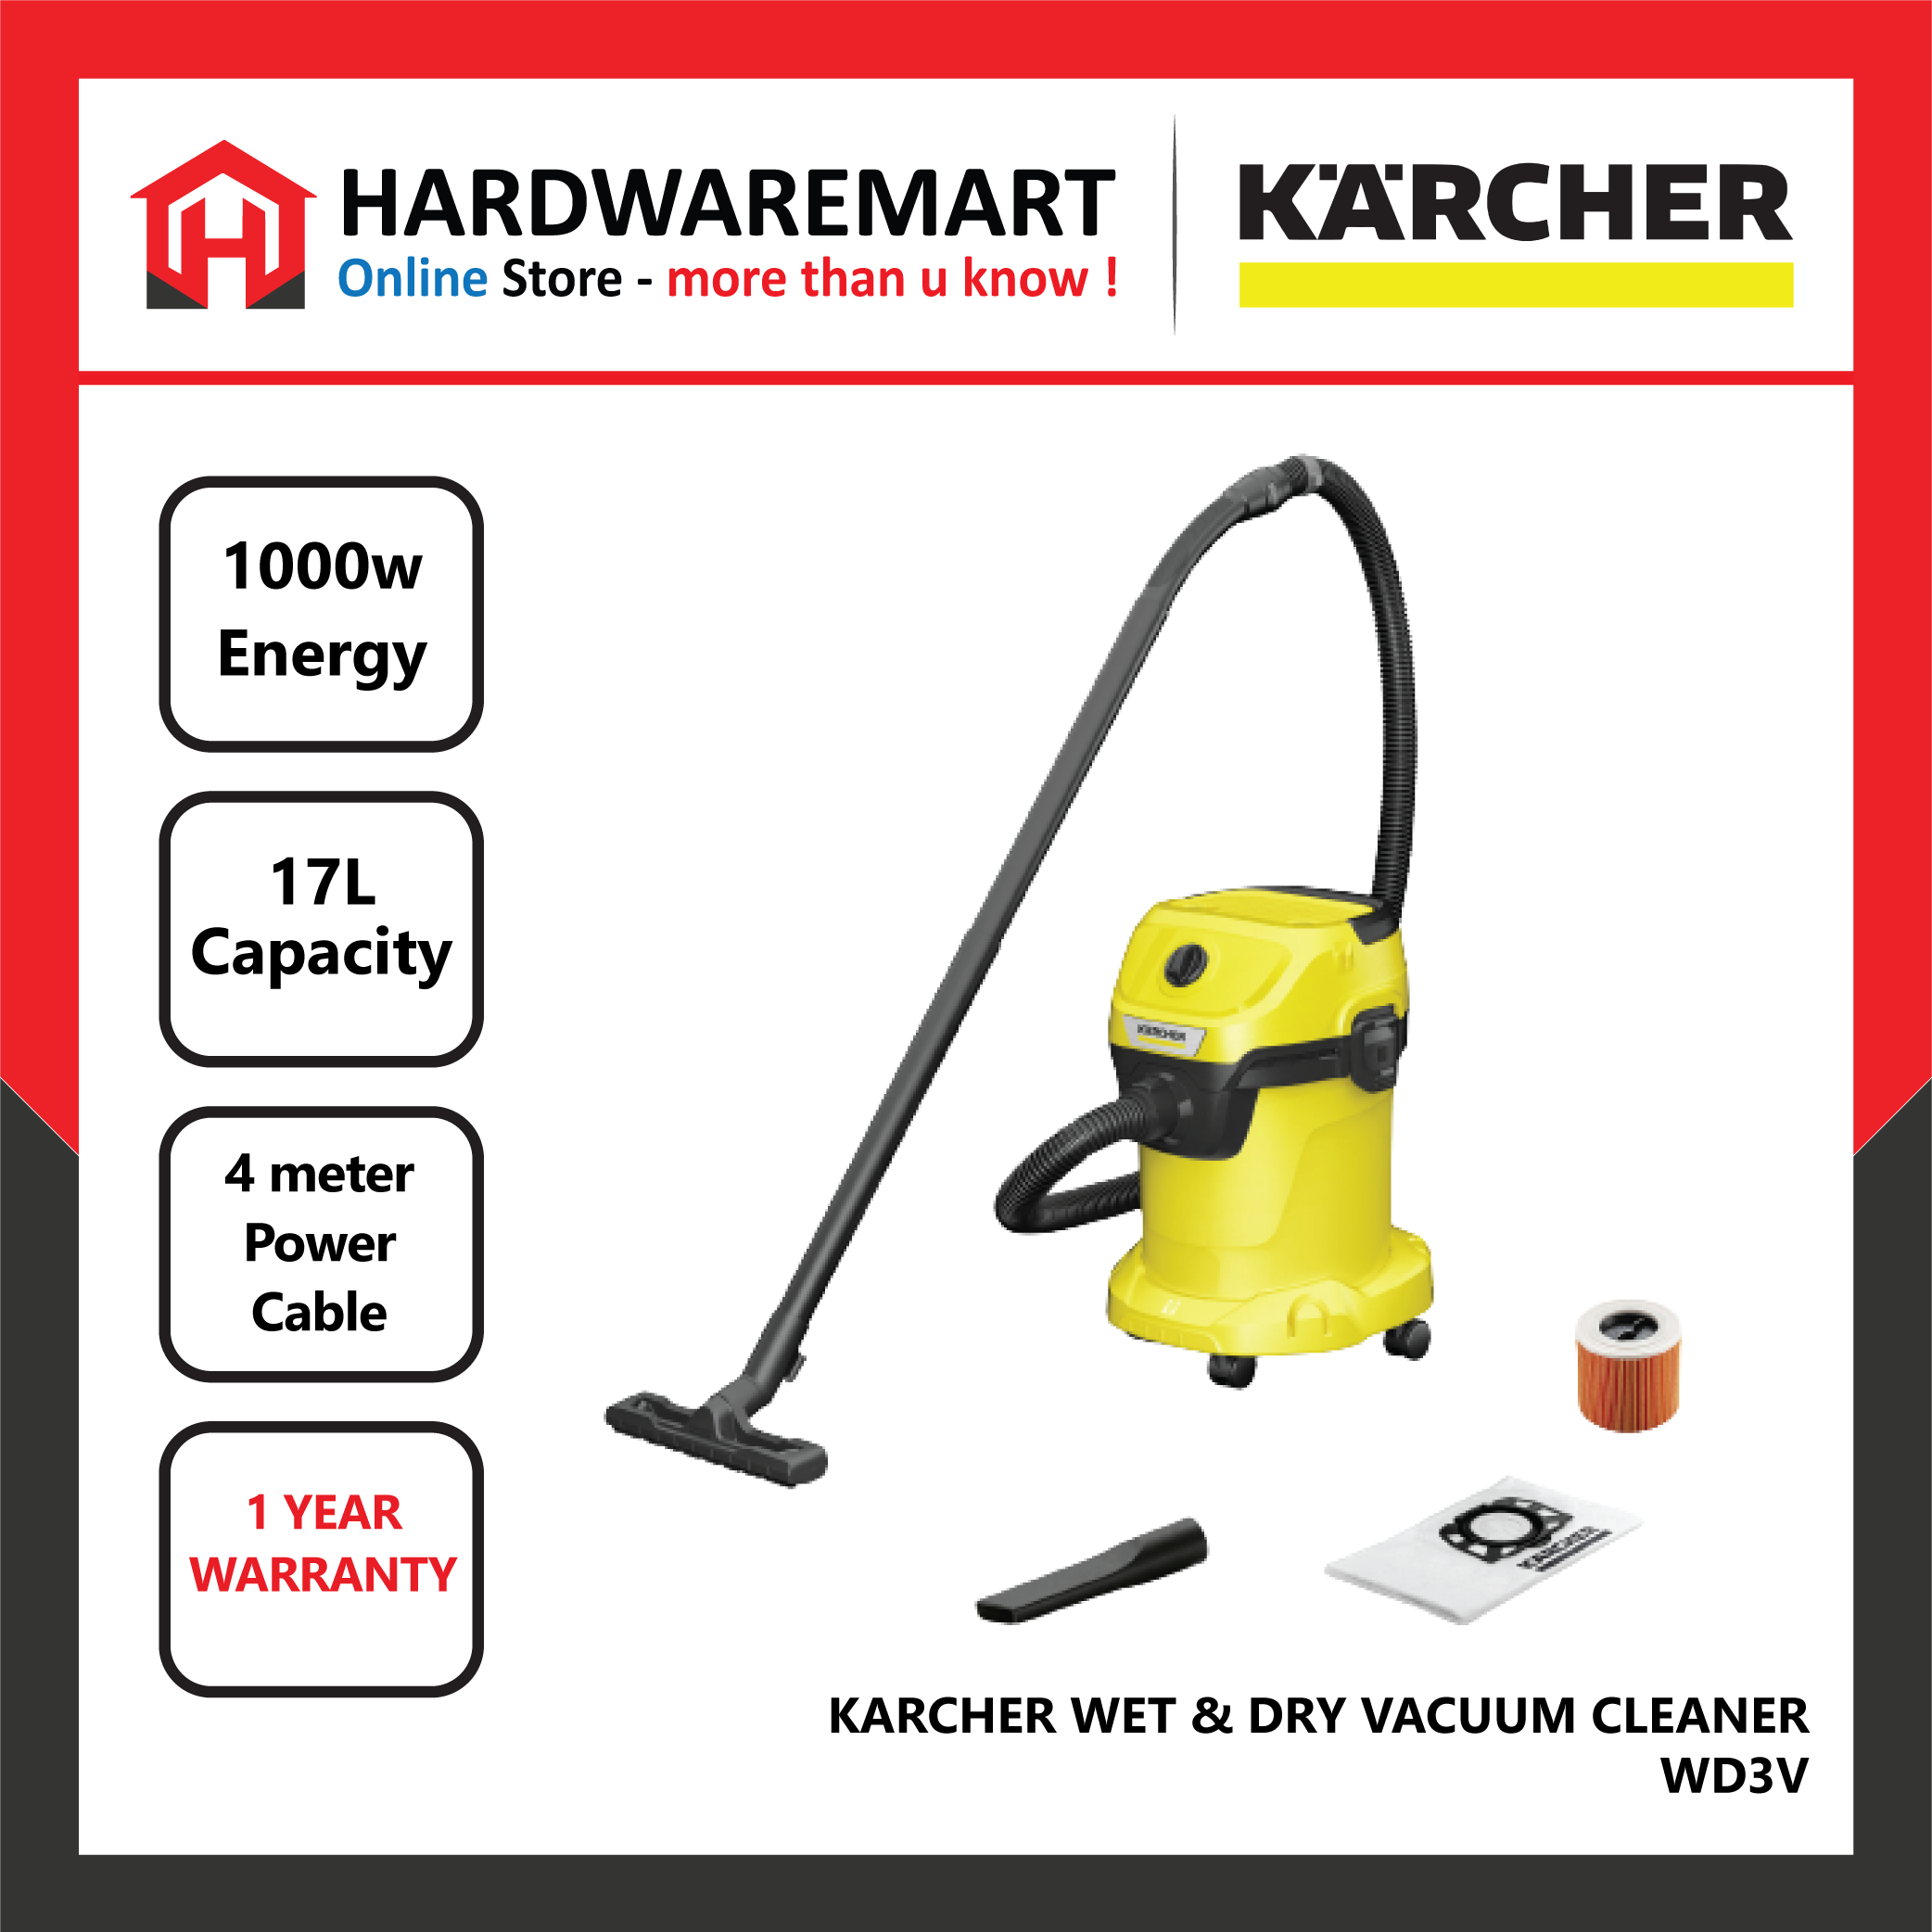 KARCHER WD3 17L Multi-Purpose Vacuum Cleaner 1000W w/ FOC 5PCS Paper Filter  Bags Vacuum Cleaner Cleaning Equipment Kuala Lumpur (KL), Malaysia,  Selangor, Setapak Supplier, Suppliers, Supply, Supplies